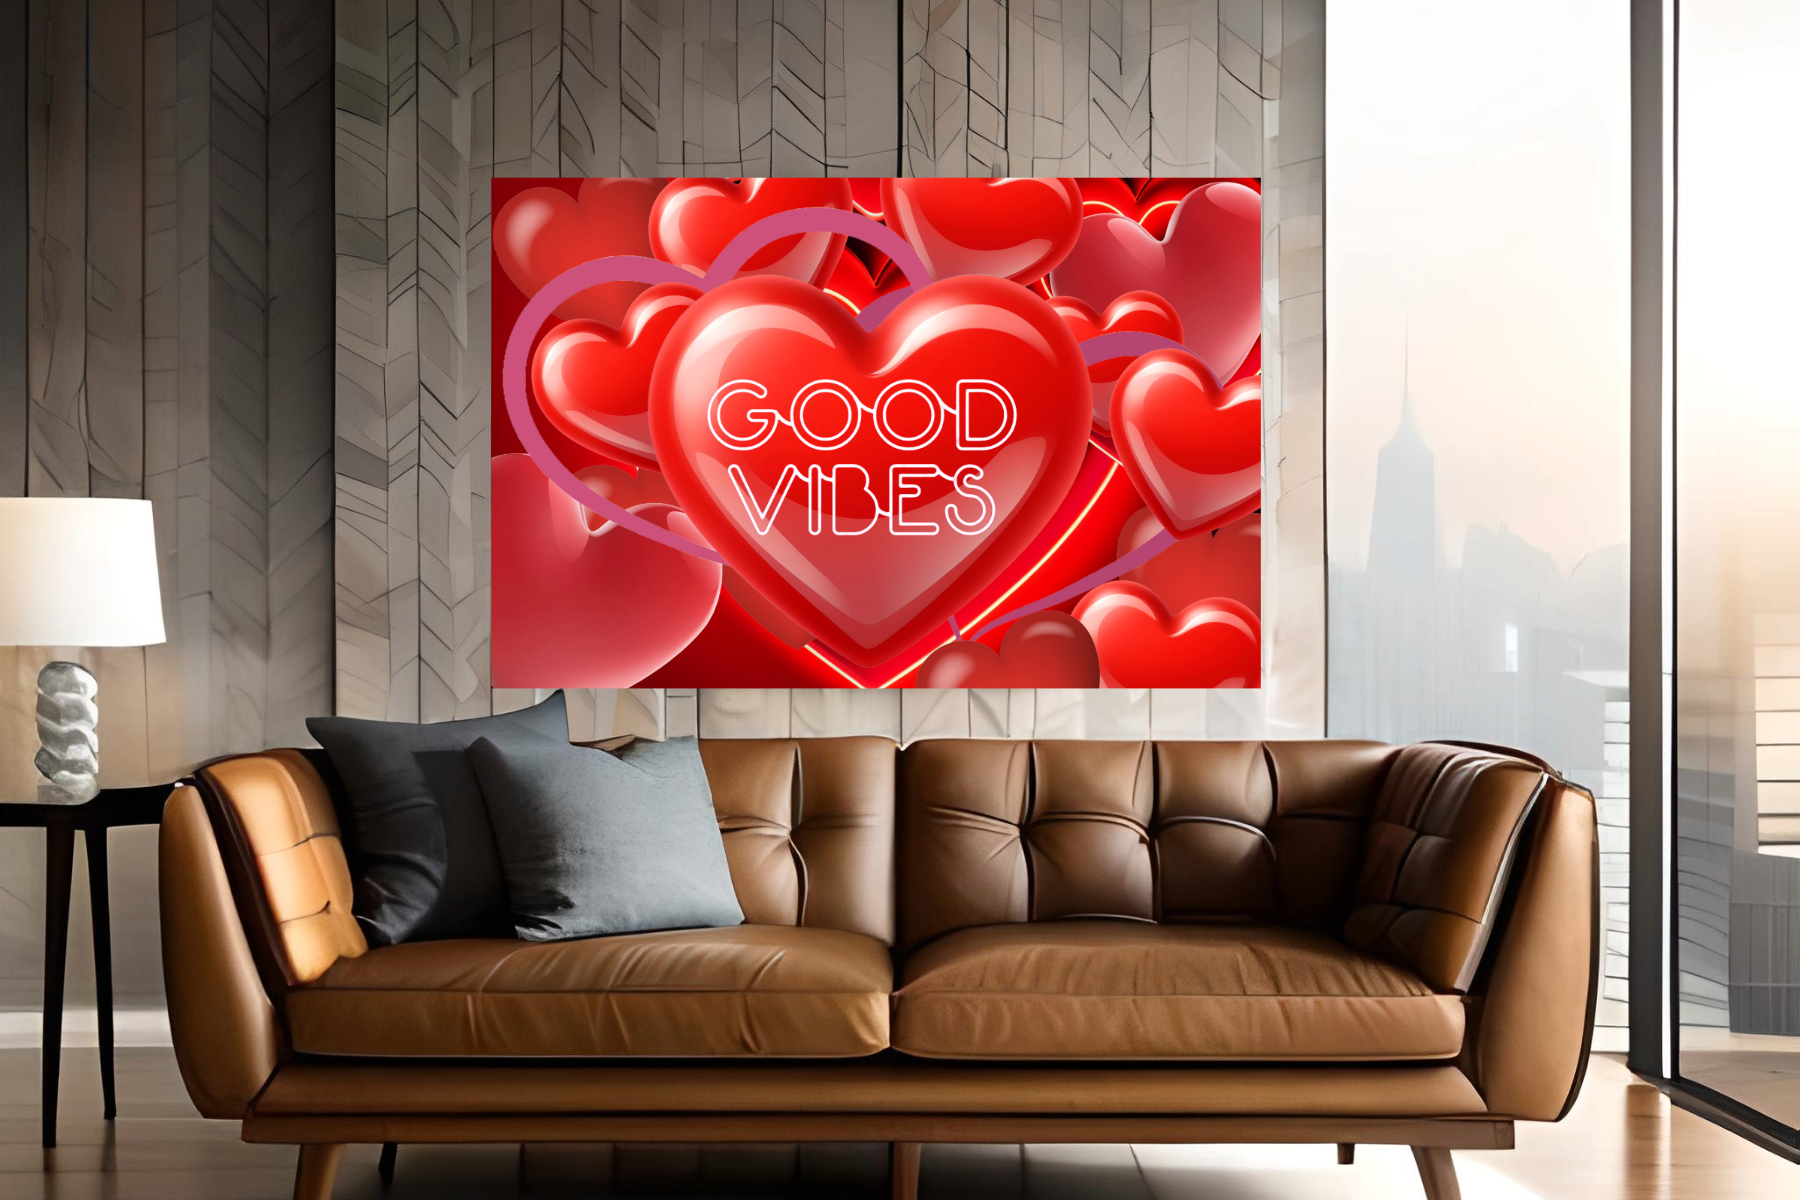 Wall Art GOOD VIBES Canvas Print Painting Original Giclee GW Love Nice Heart Beauty Fun Design Fit Hot House Home Office Gift Ready Hang Living